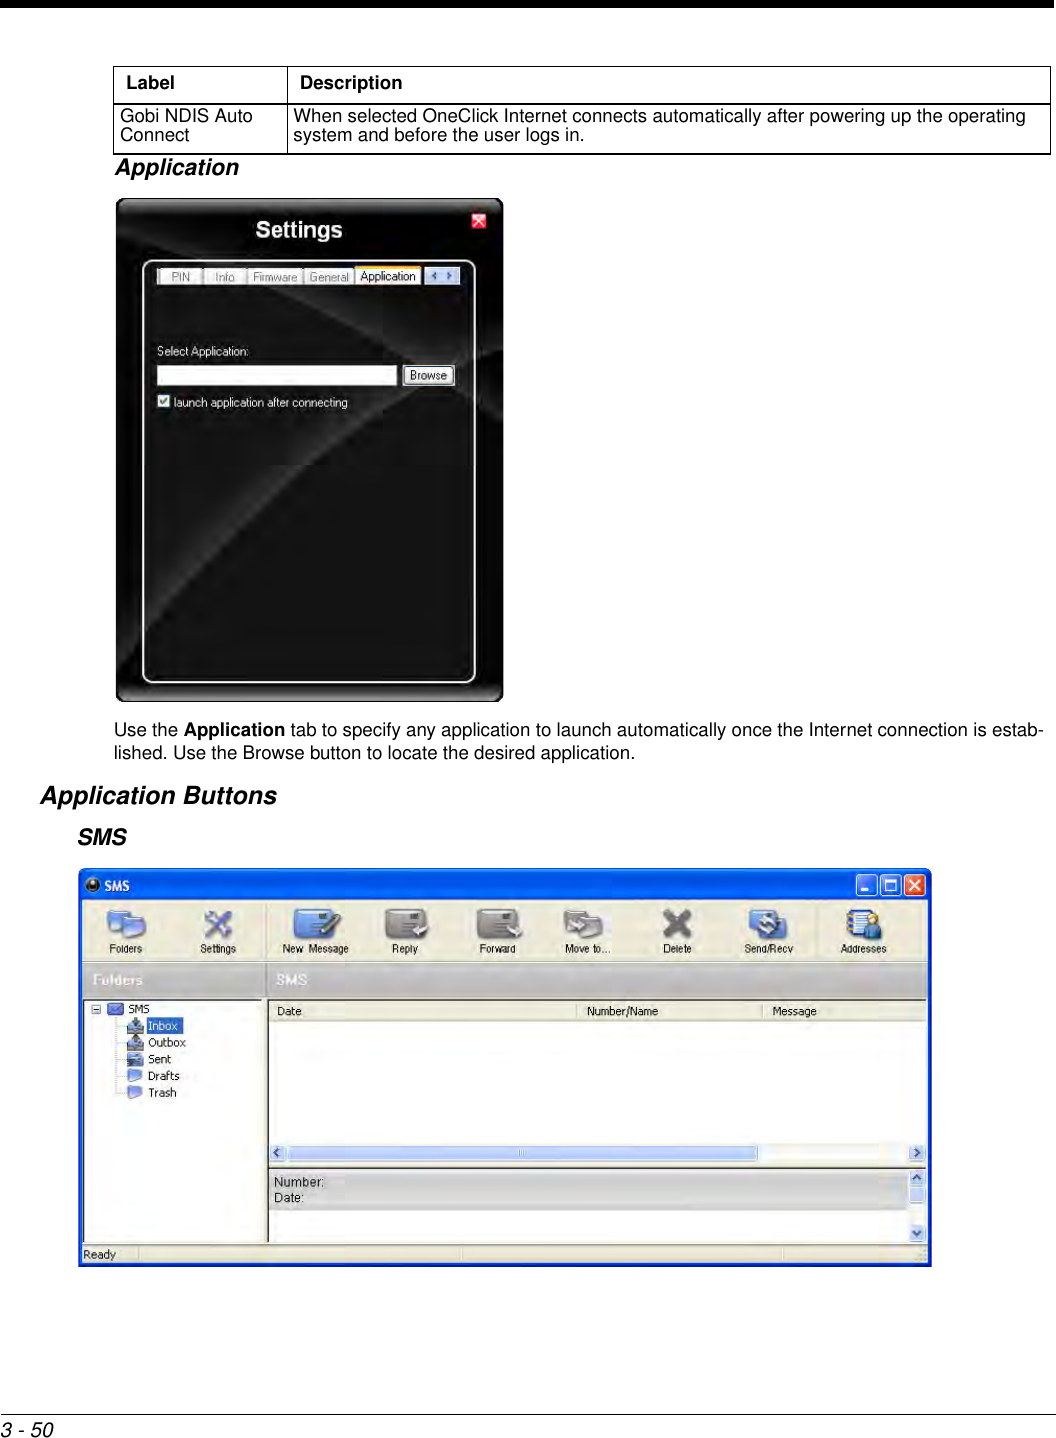 3 - 50ApplicationUse the Application tab to specify any application to launch automatically once the Internet connection is estab-lished. Use the Browse button to locate the desired application.Application ButtonsSMSGobi NDIS Auto Connect When selected OneClick Internet connects automatically after powering up the operating system and before the user logs in.Label Description